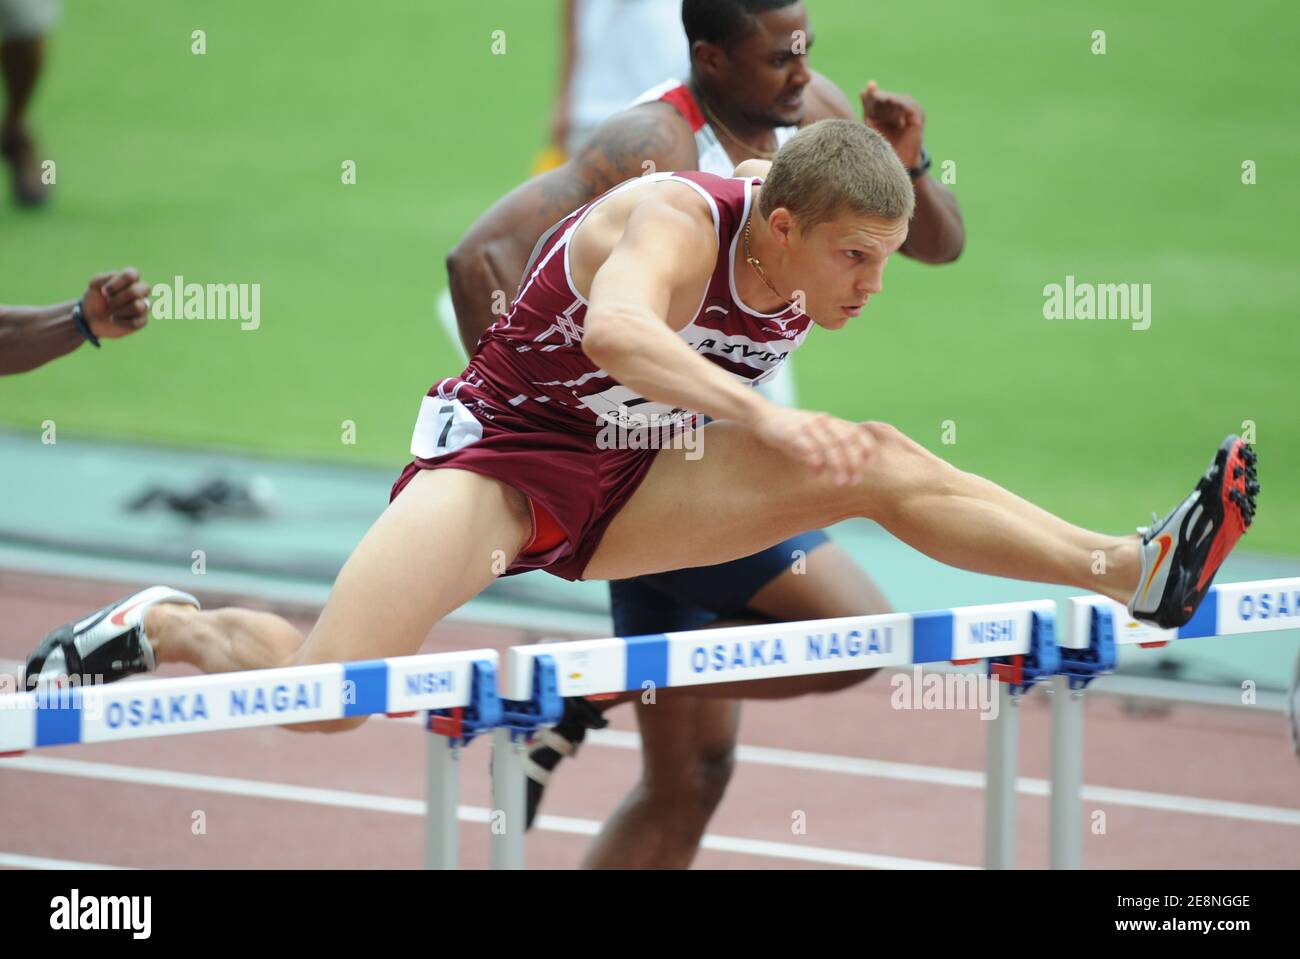 Latvia's Stanilavs Olijars competes on men's 110 meters hurdles heats during the 11 World Championships in Athletics, at the Nagai stadium, in Osaka, Japan, on August 29, 2007. Photo by Gouhier-Kempinaire/Cameleon/ABACAPRESS.COM Stock Photo